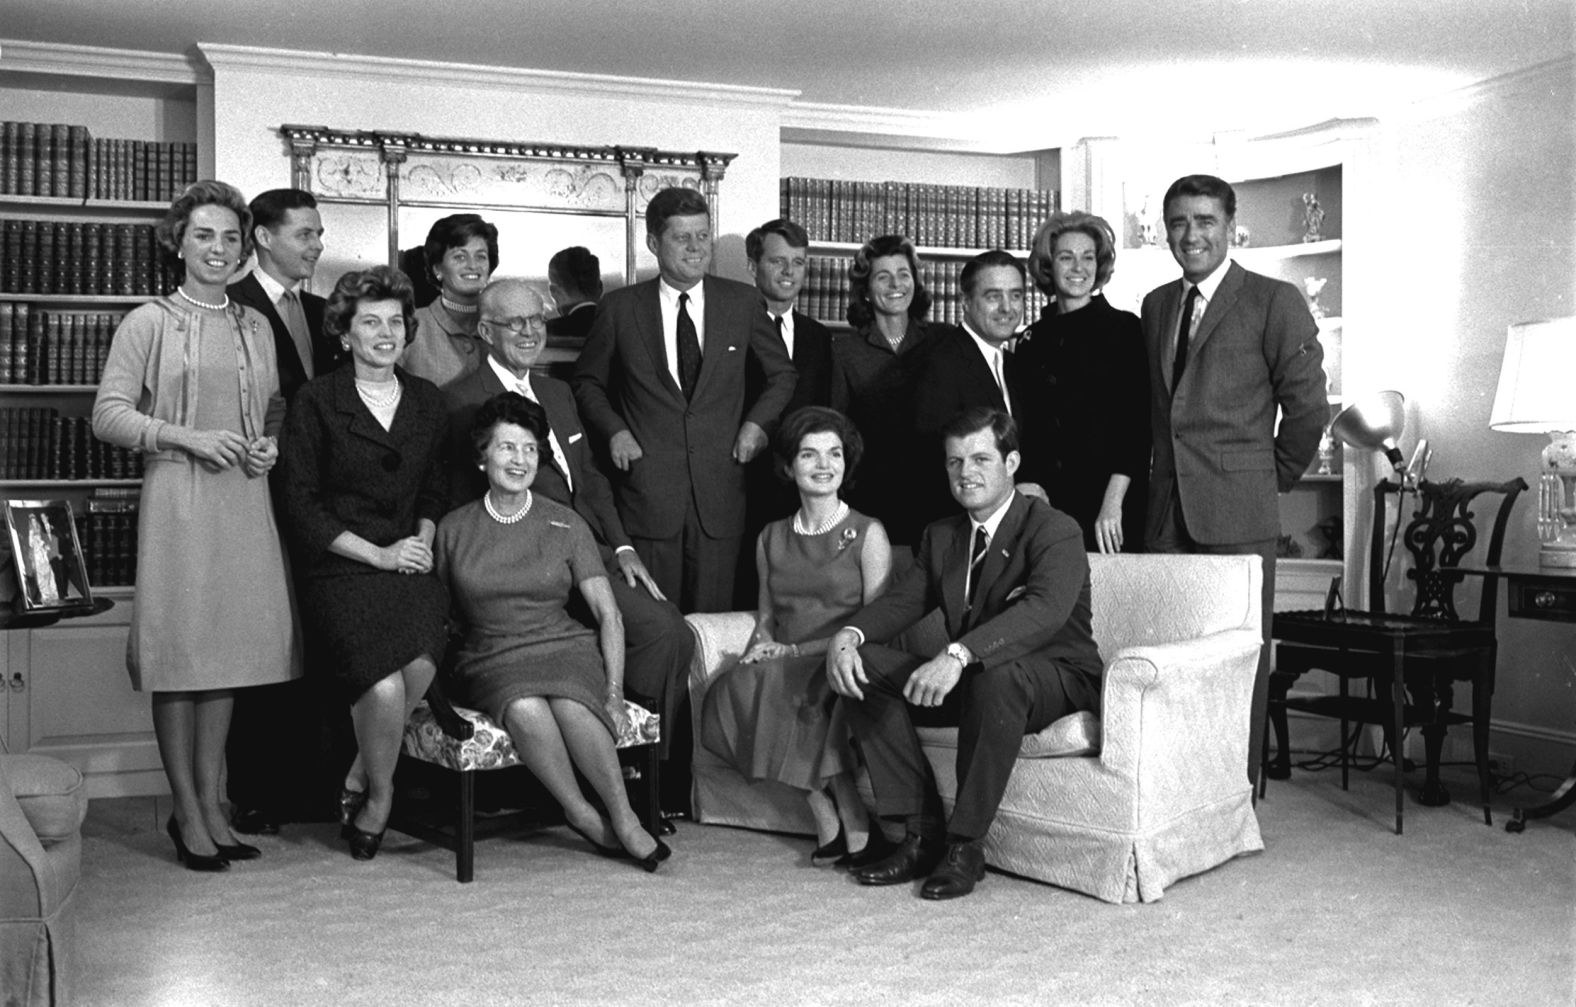 Kennedy is surrounded by members of his family in his father's living room in November 1960. It was the day after Kennedy was elected president.